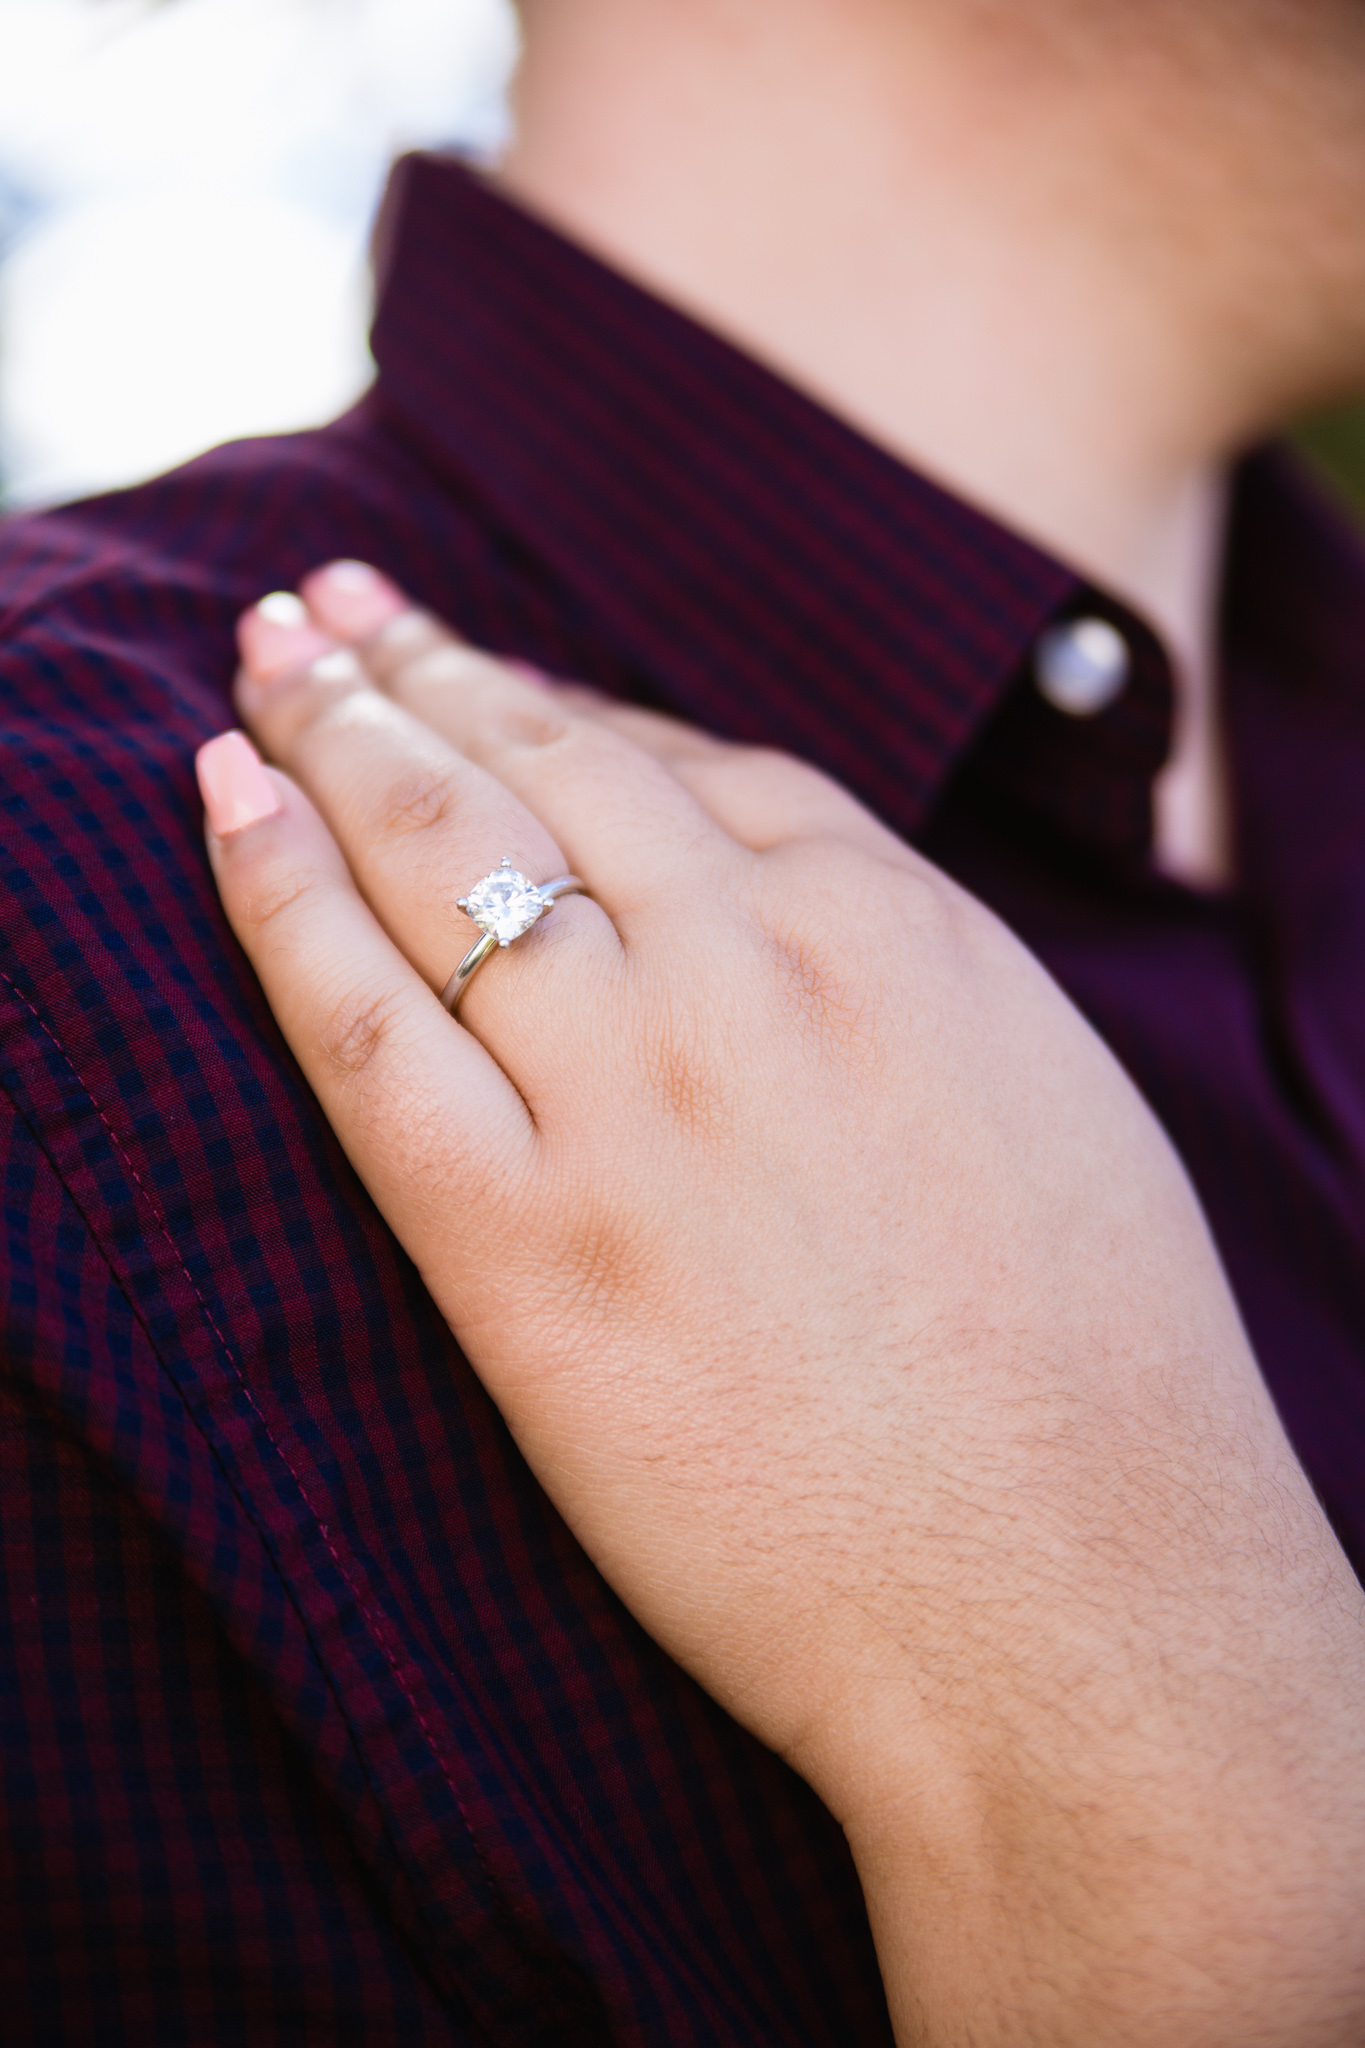 Detail image of an engagement ring at an engagement session by PMA Photography.